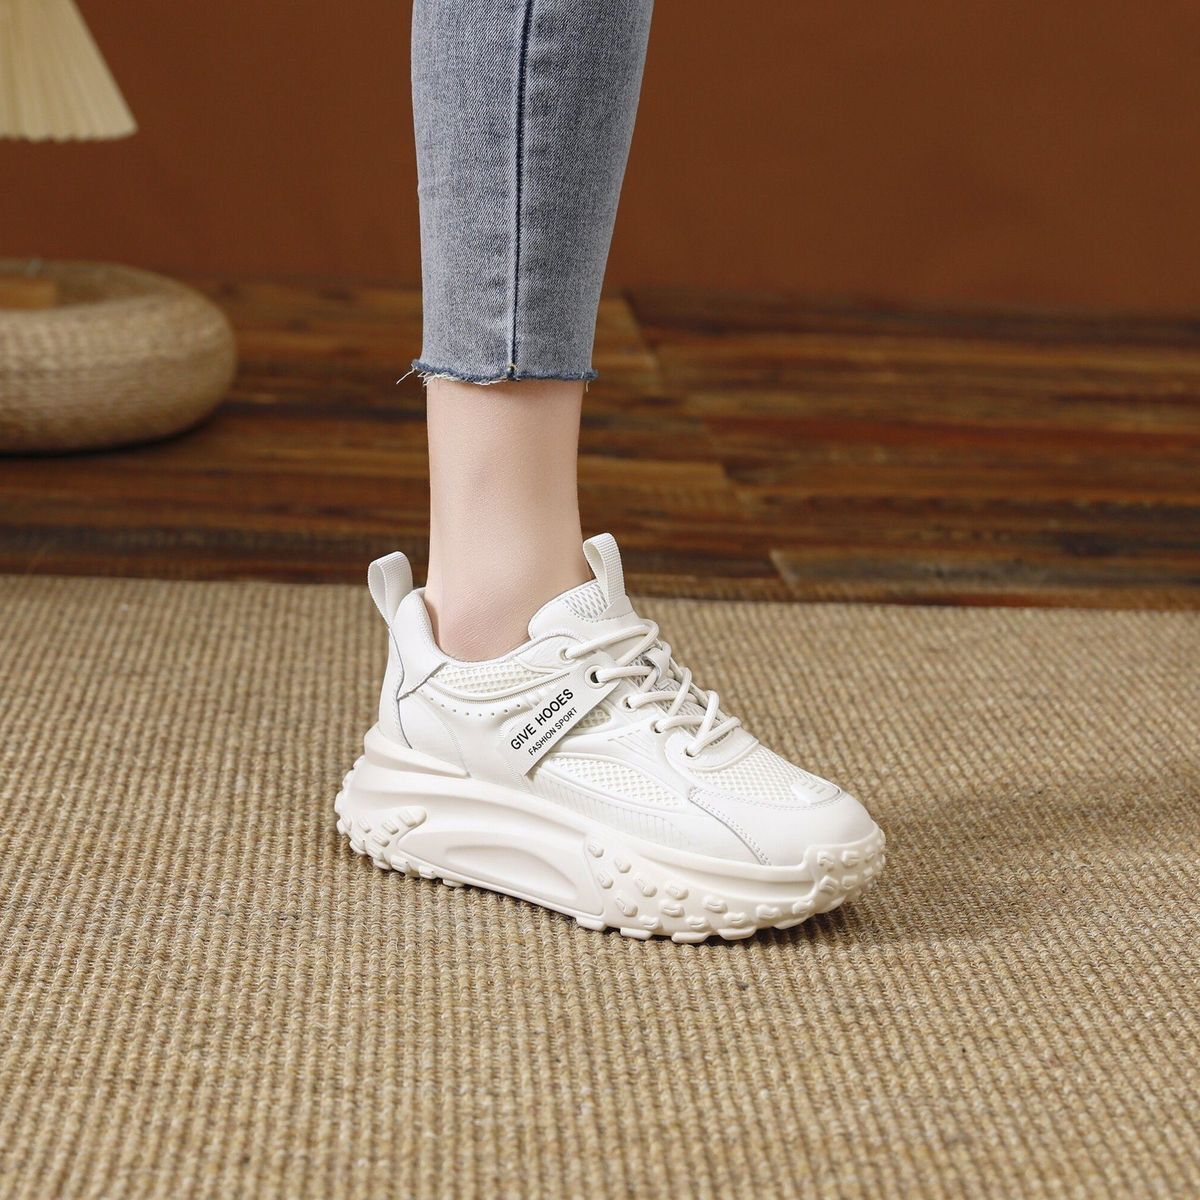 Soft Sole Breathable Casual Shoes Lurebest 8395